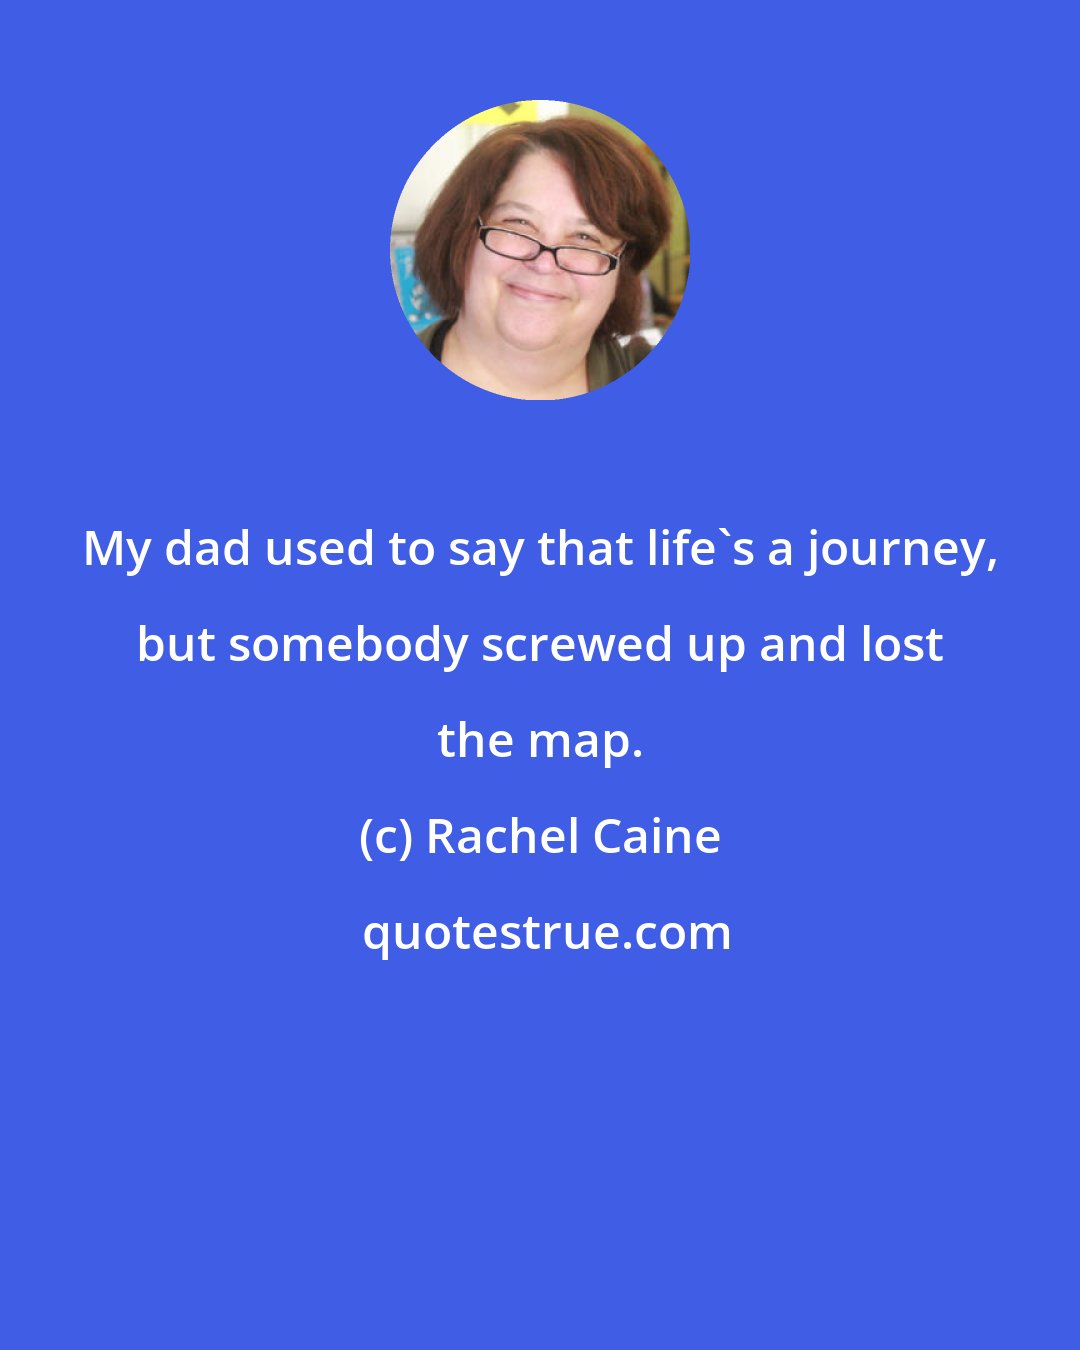 Rachel Caine: My dad used to say that life's a journey, but somebody screwed up and lost the map.